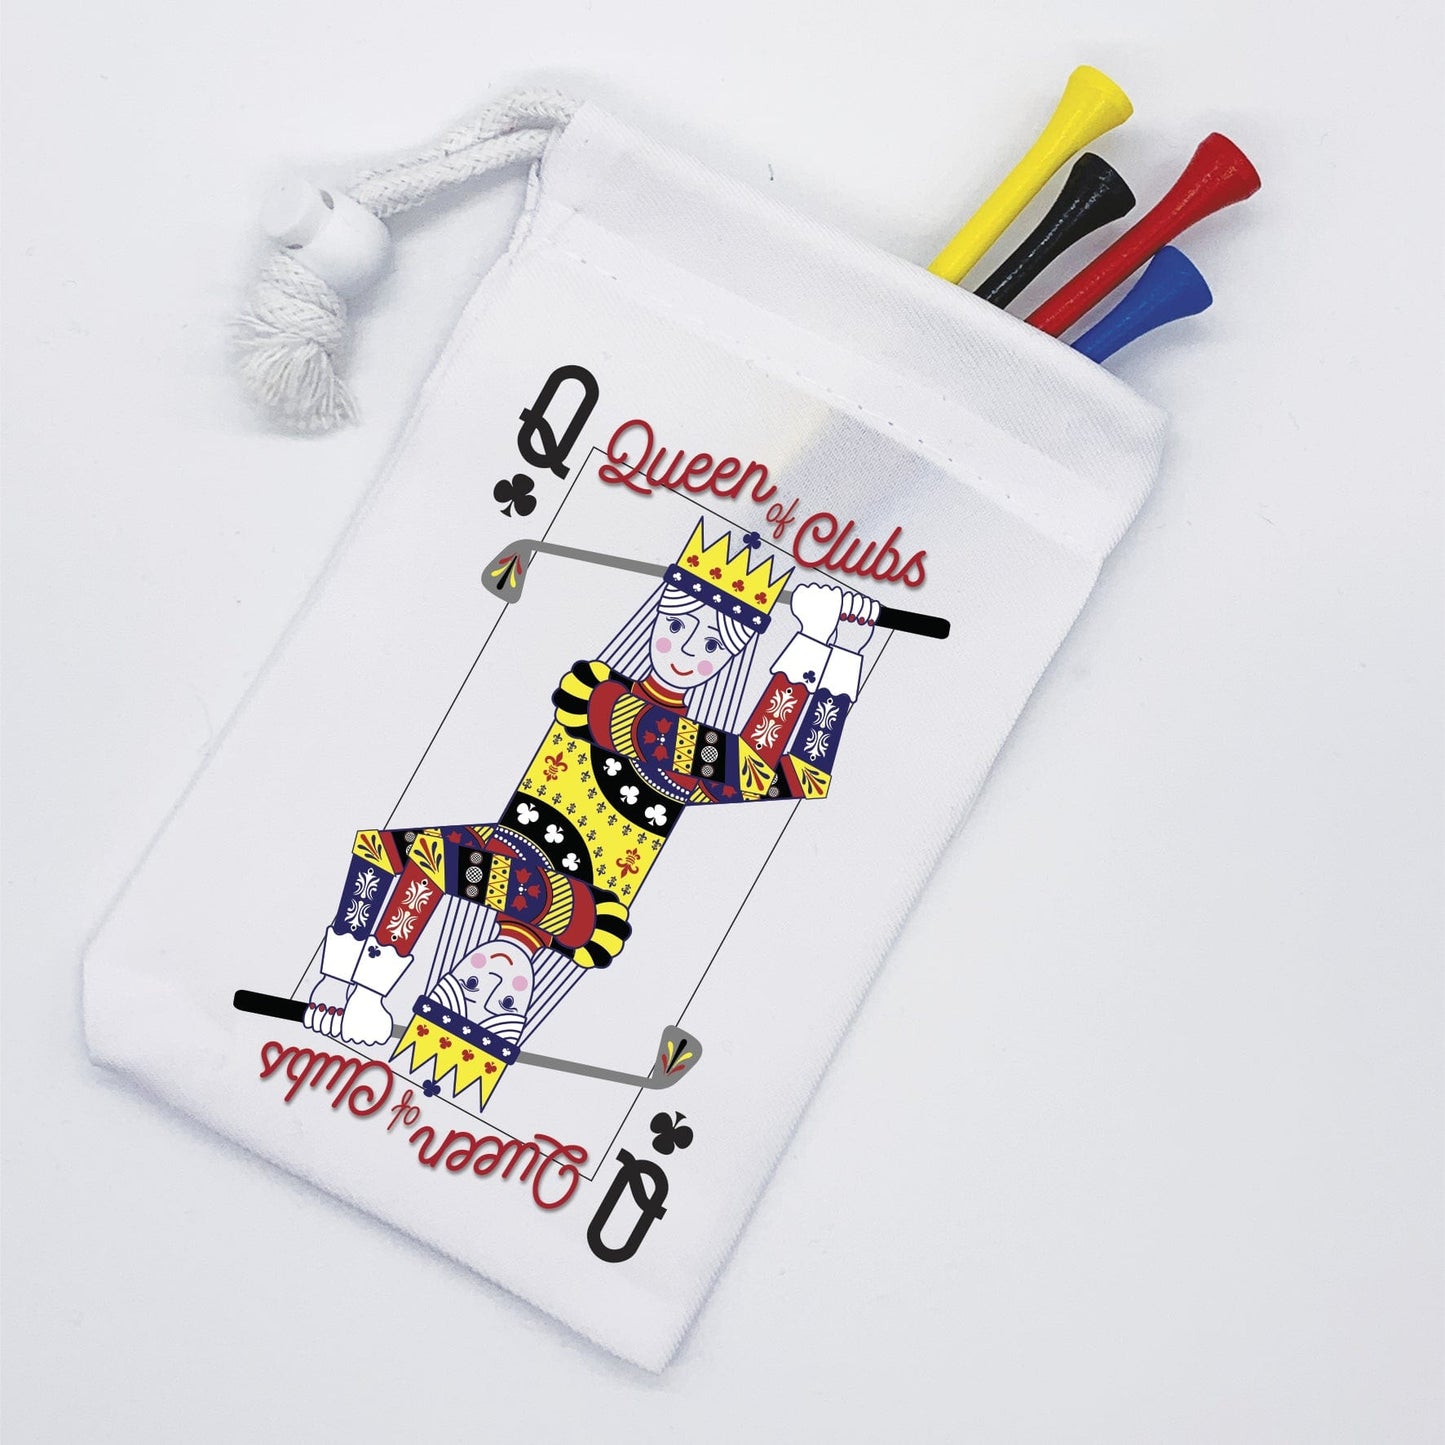 Personalised Queen Of Clubs Golf Tee Bag - Golf Lover Gift - Stocking Filler For Her - Funny Golfing Bag - Golfer Pouch - Hand finished in the UK